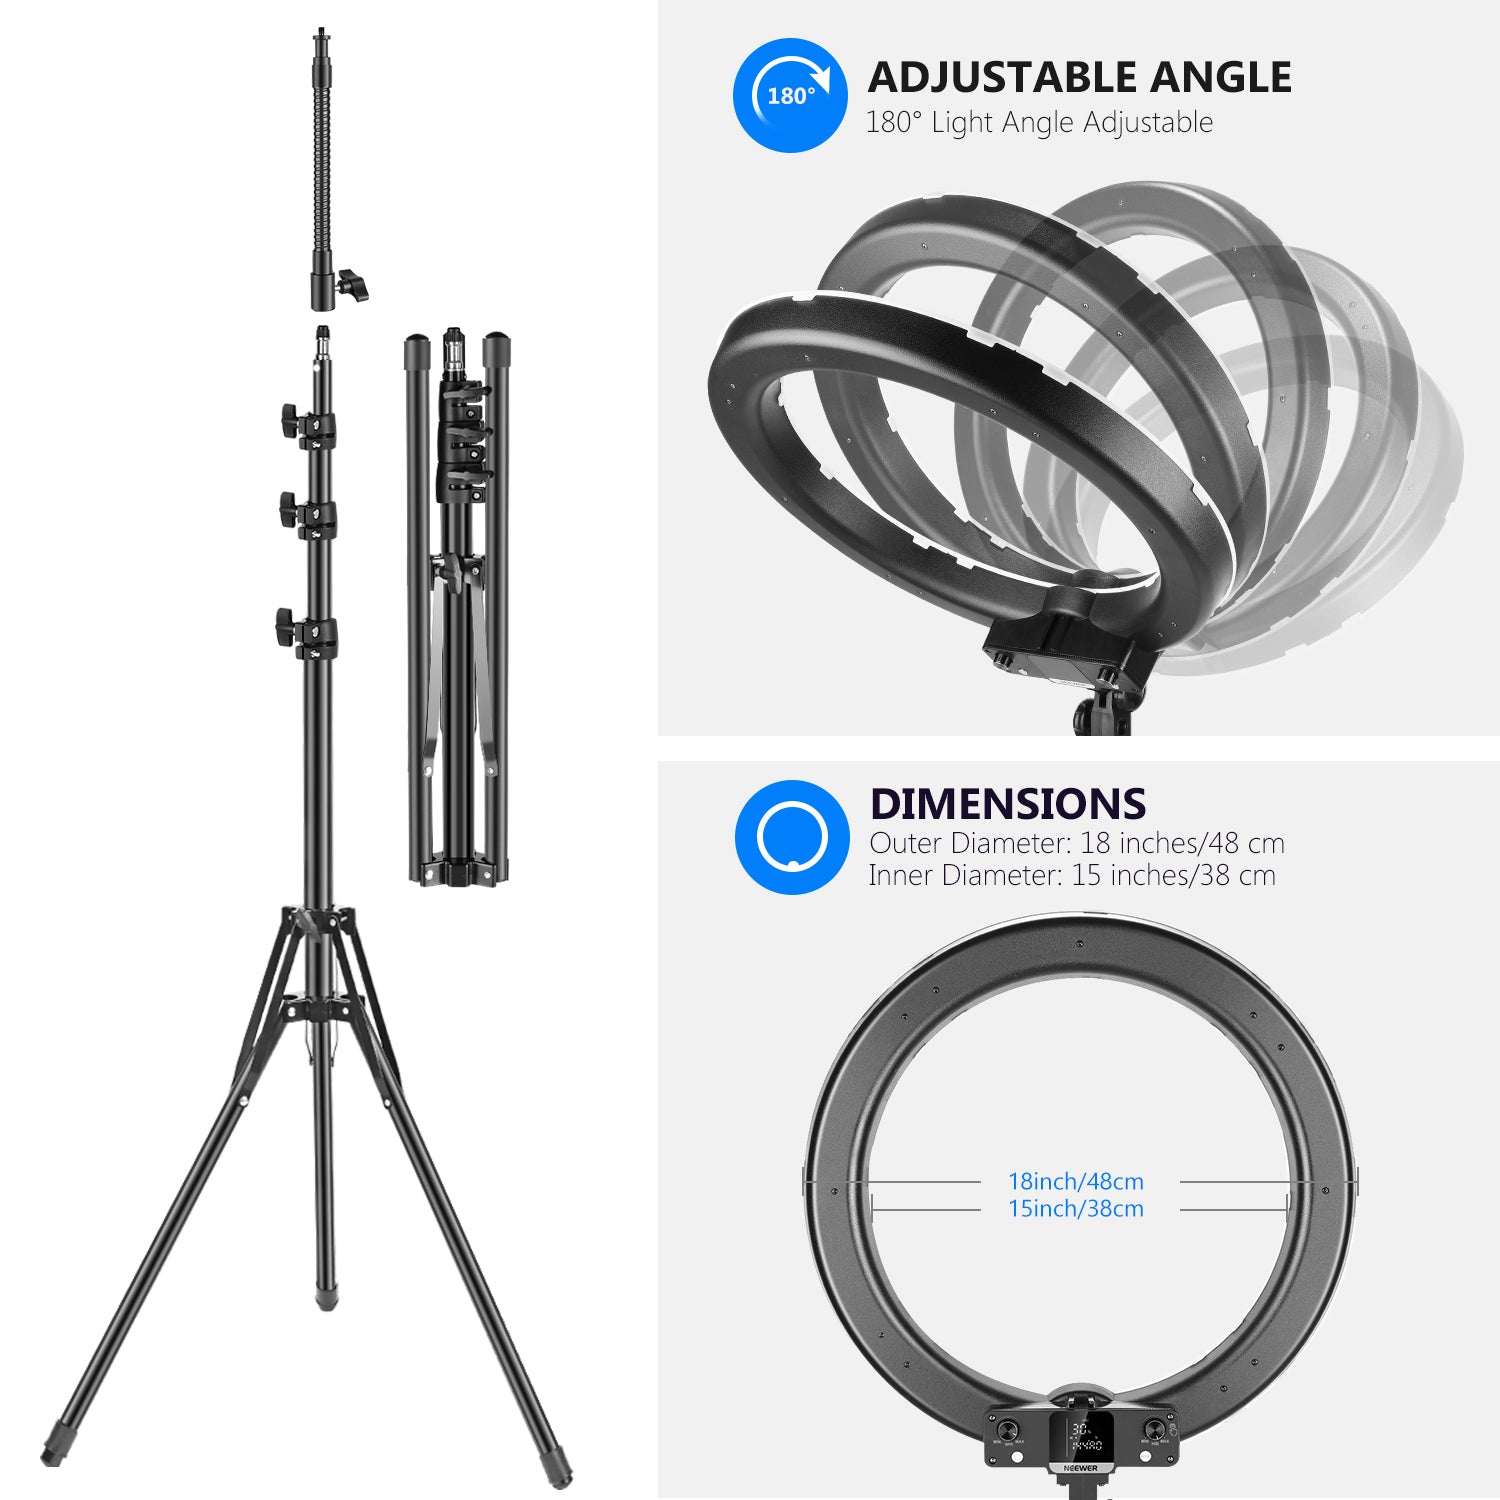 Neewer 10 LED Ring Light with Tripod